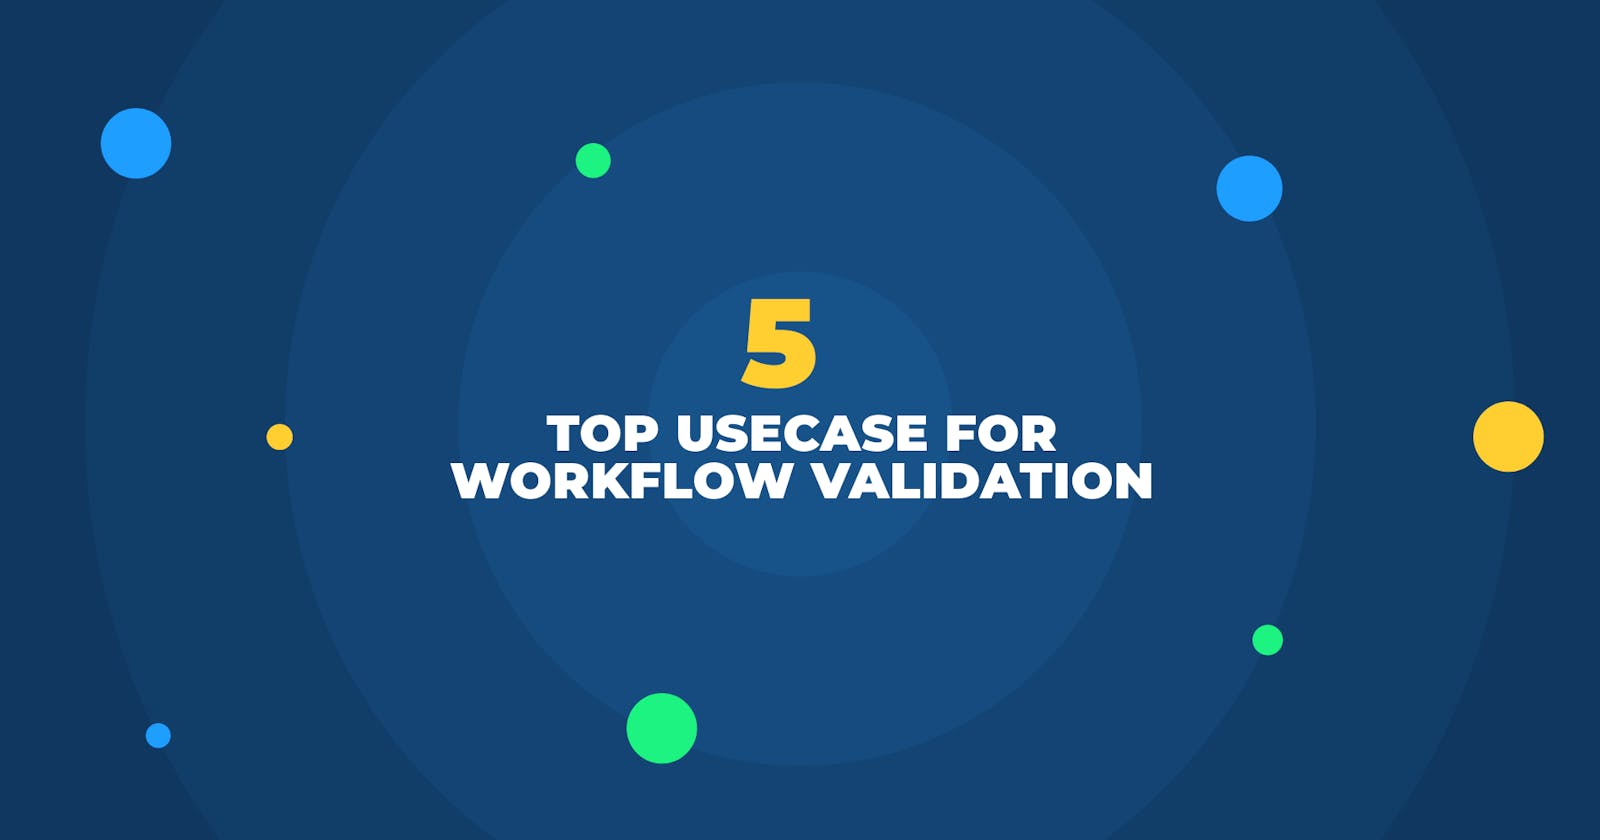 Top 5 Use Cases for Workflow Automation in Banking